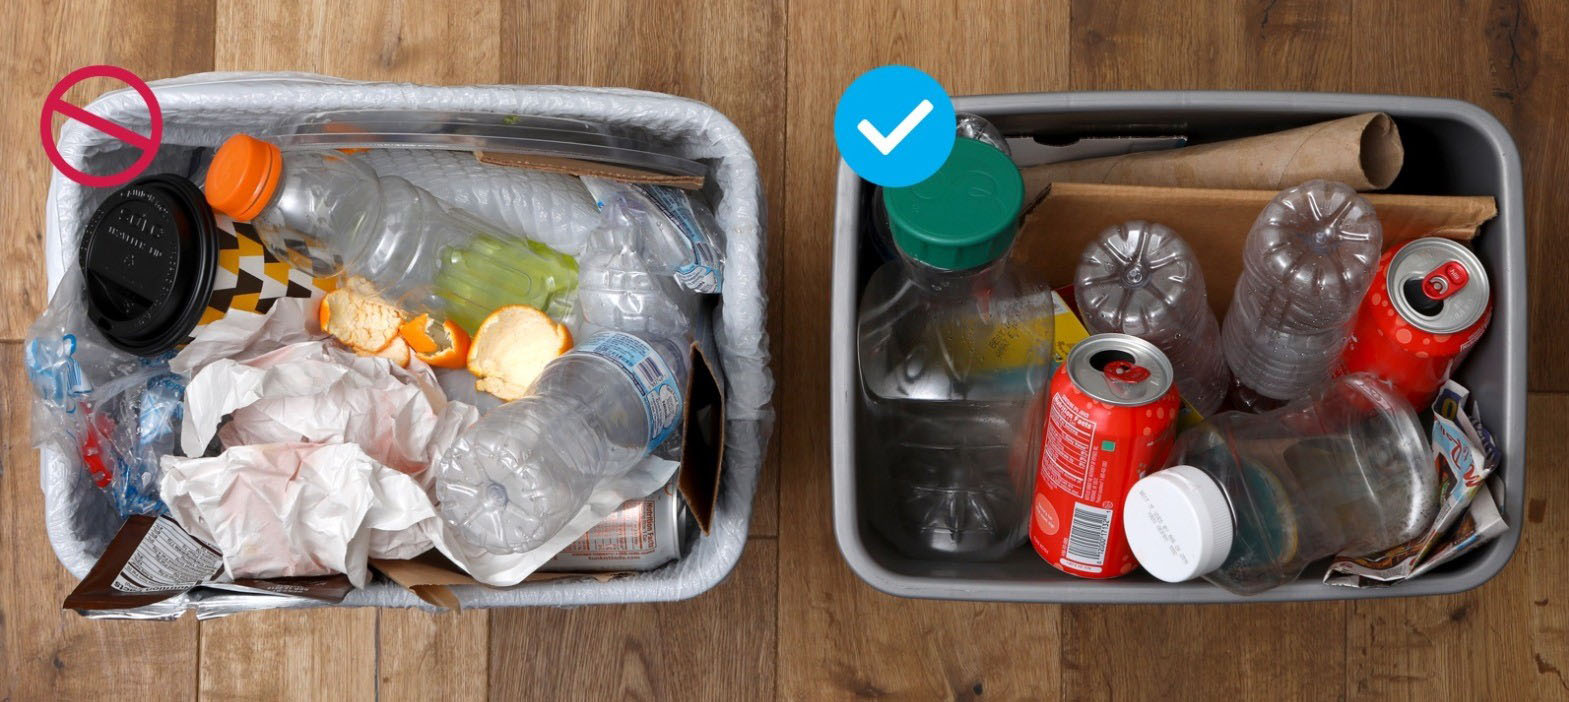 What is and is not accepted in your curbside recycling container